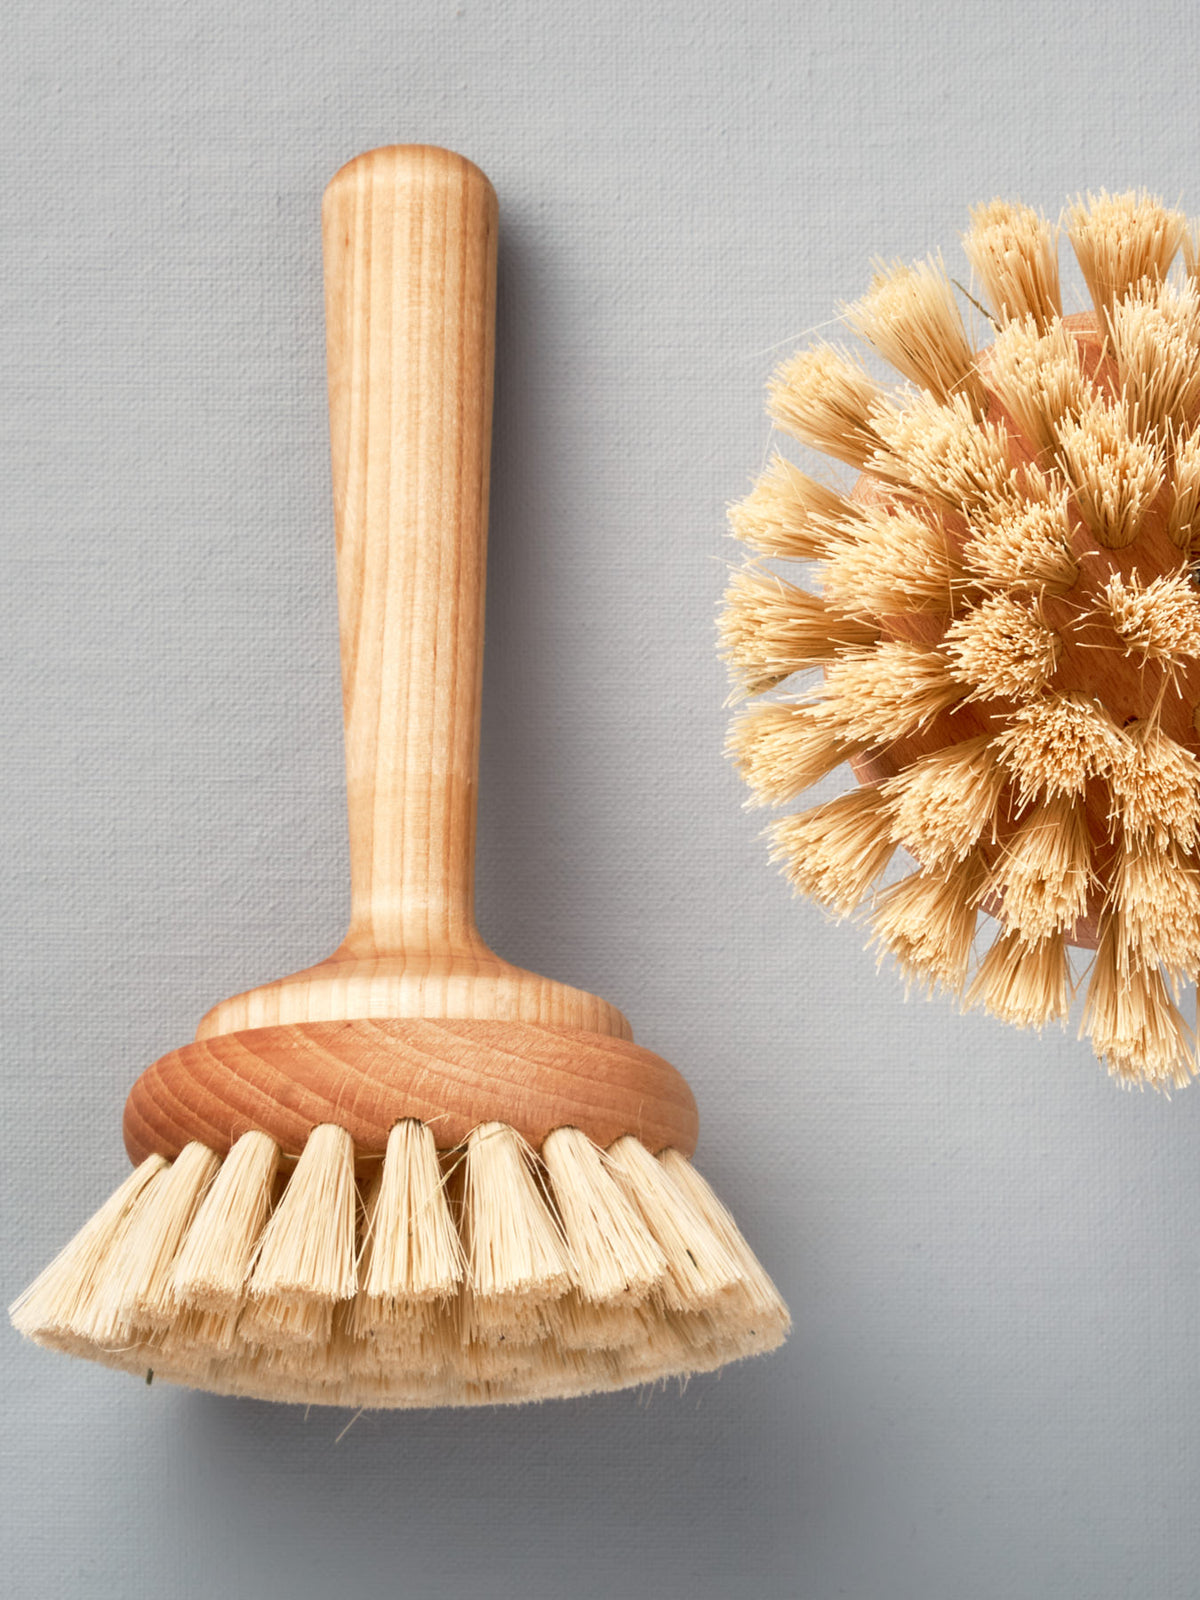 Two Iris Hantverk bathroom cleaning brushes next to each other on a grey background.